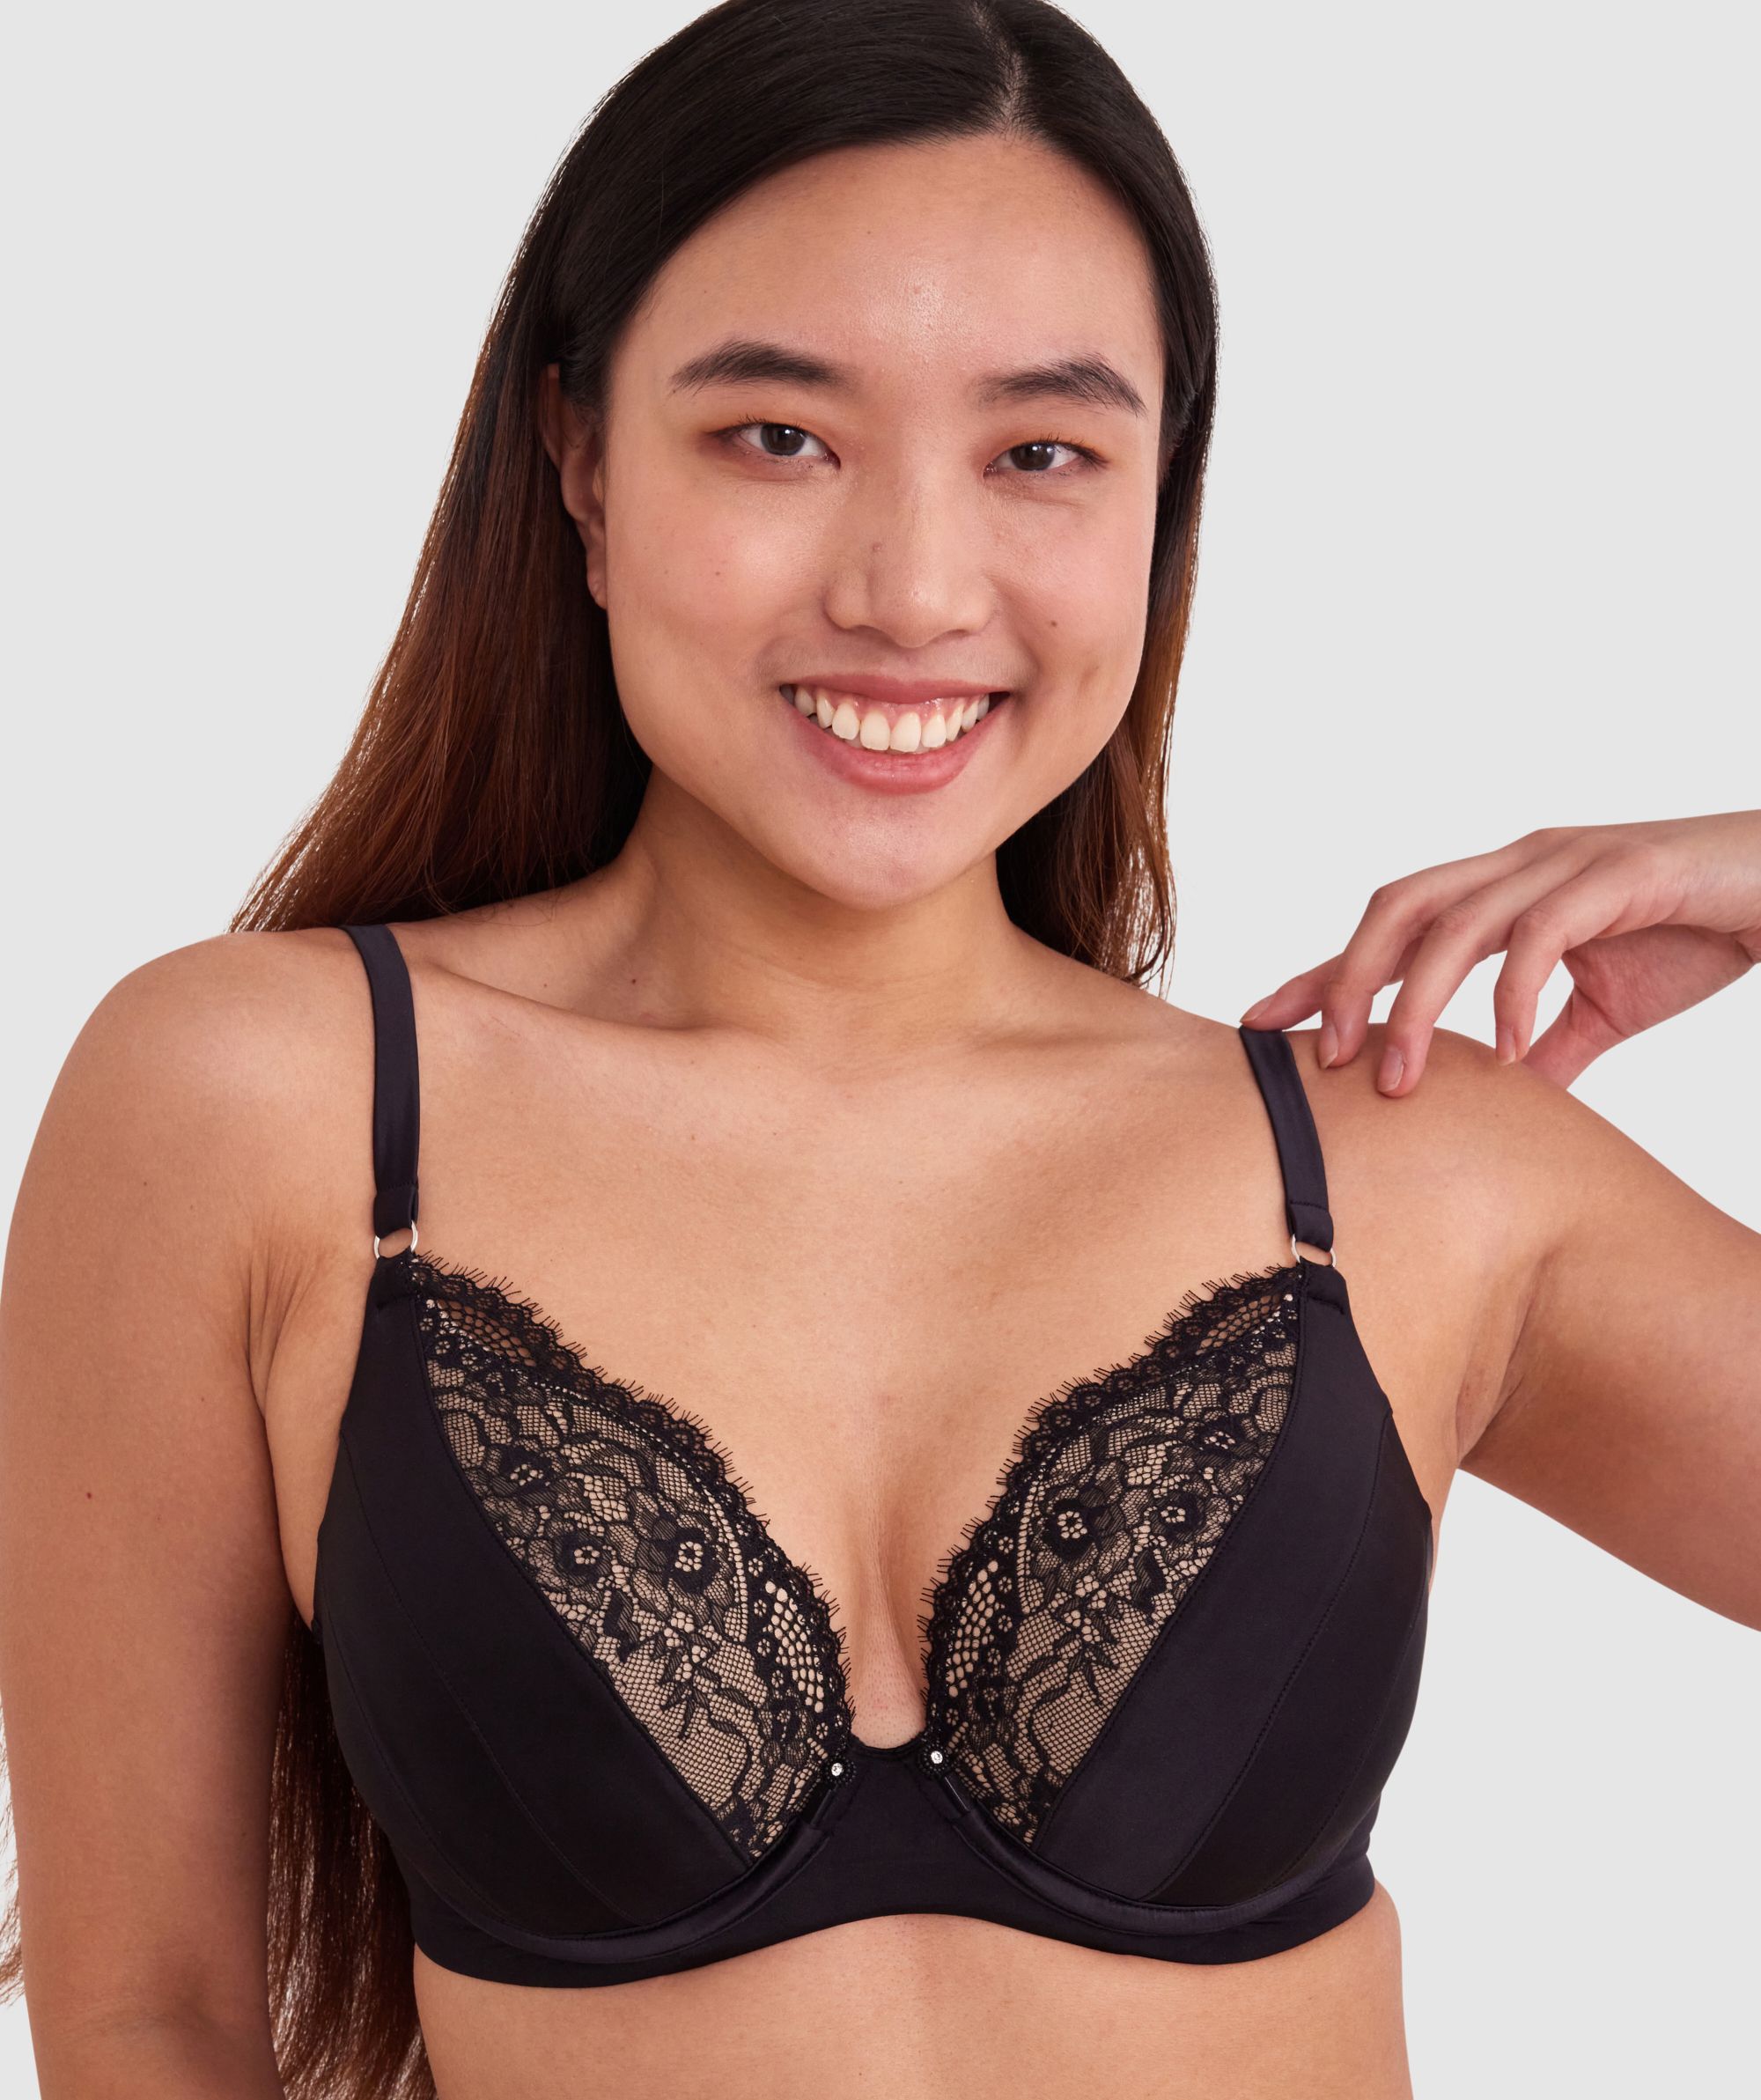 Bras N Things Revolve Removable Wire Full Cup Plunge Bra - Black